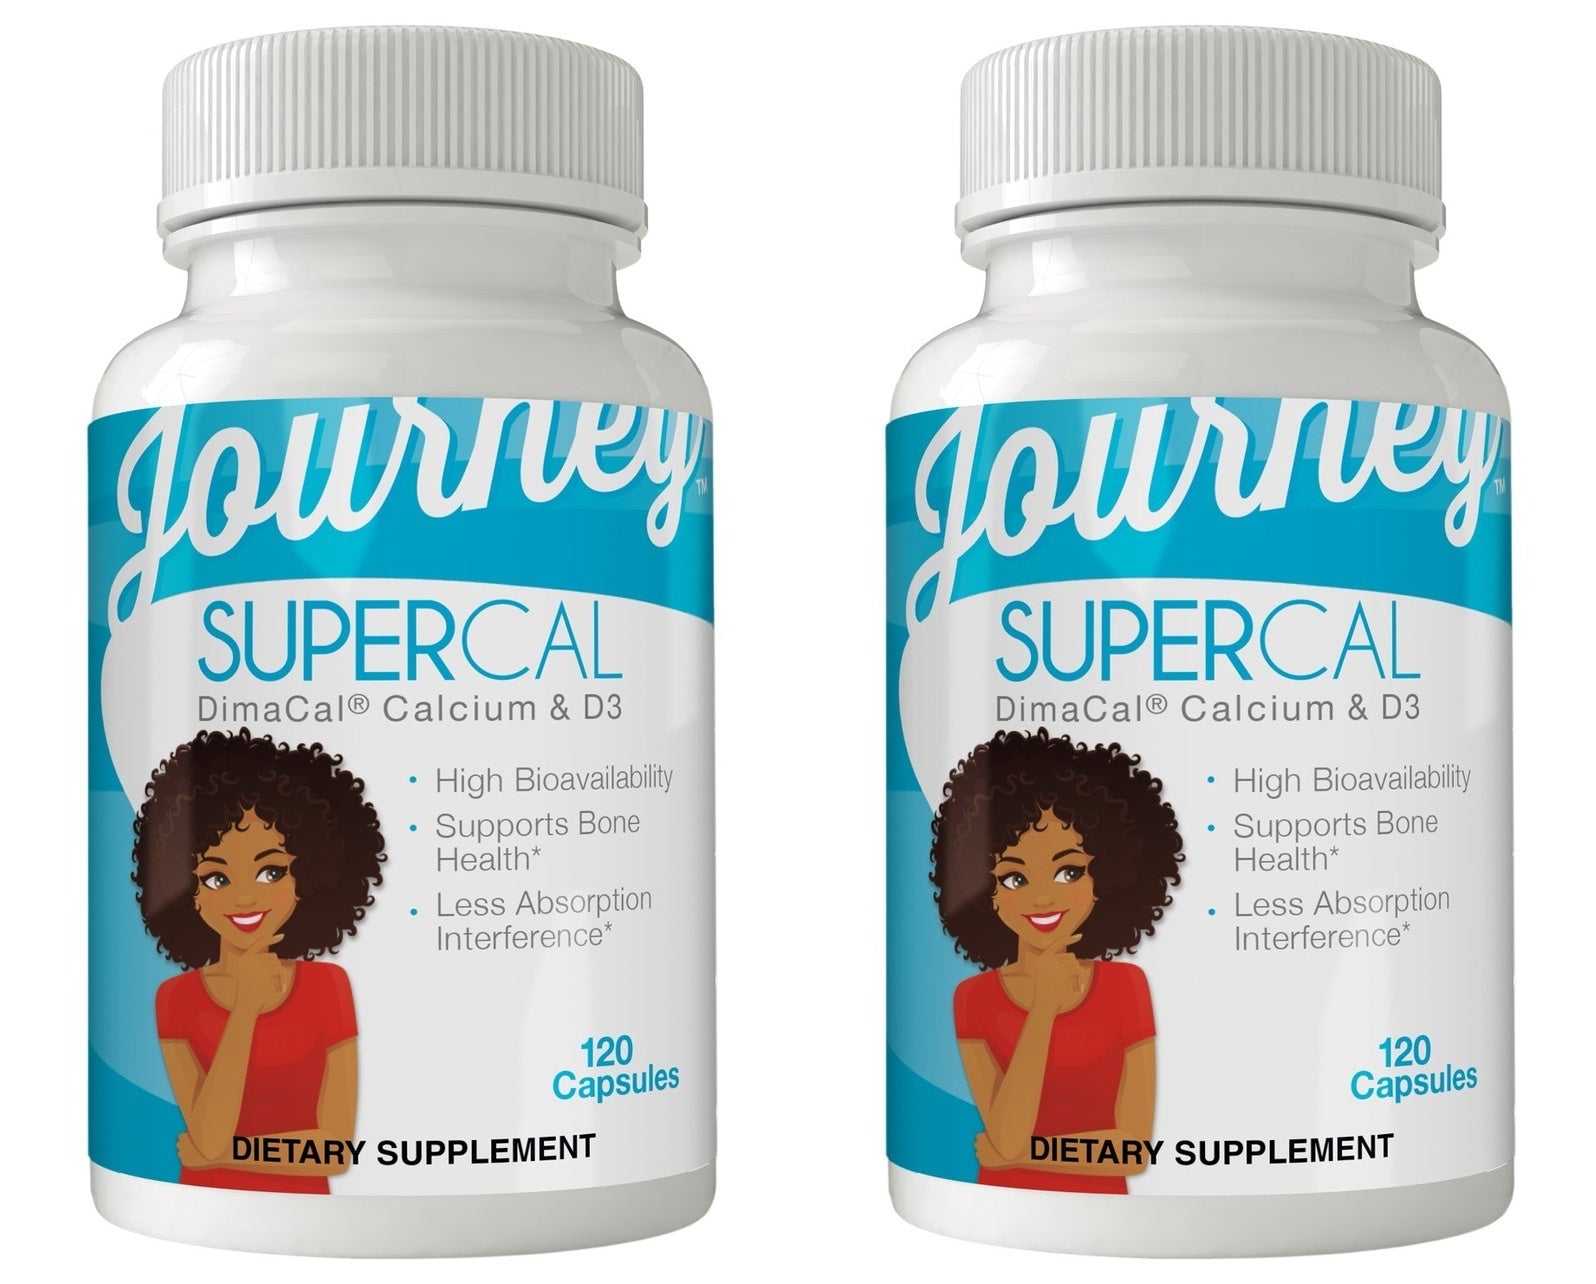 Journey SuperCal Calcium Capsules 500mg by Bariatric Eating